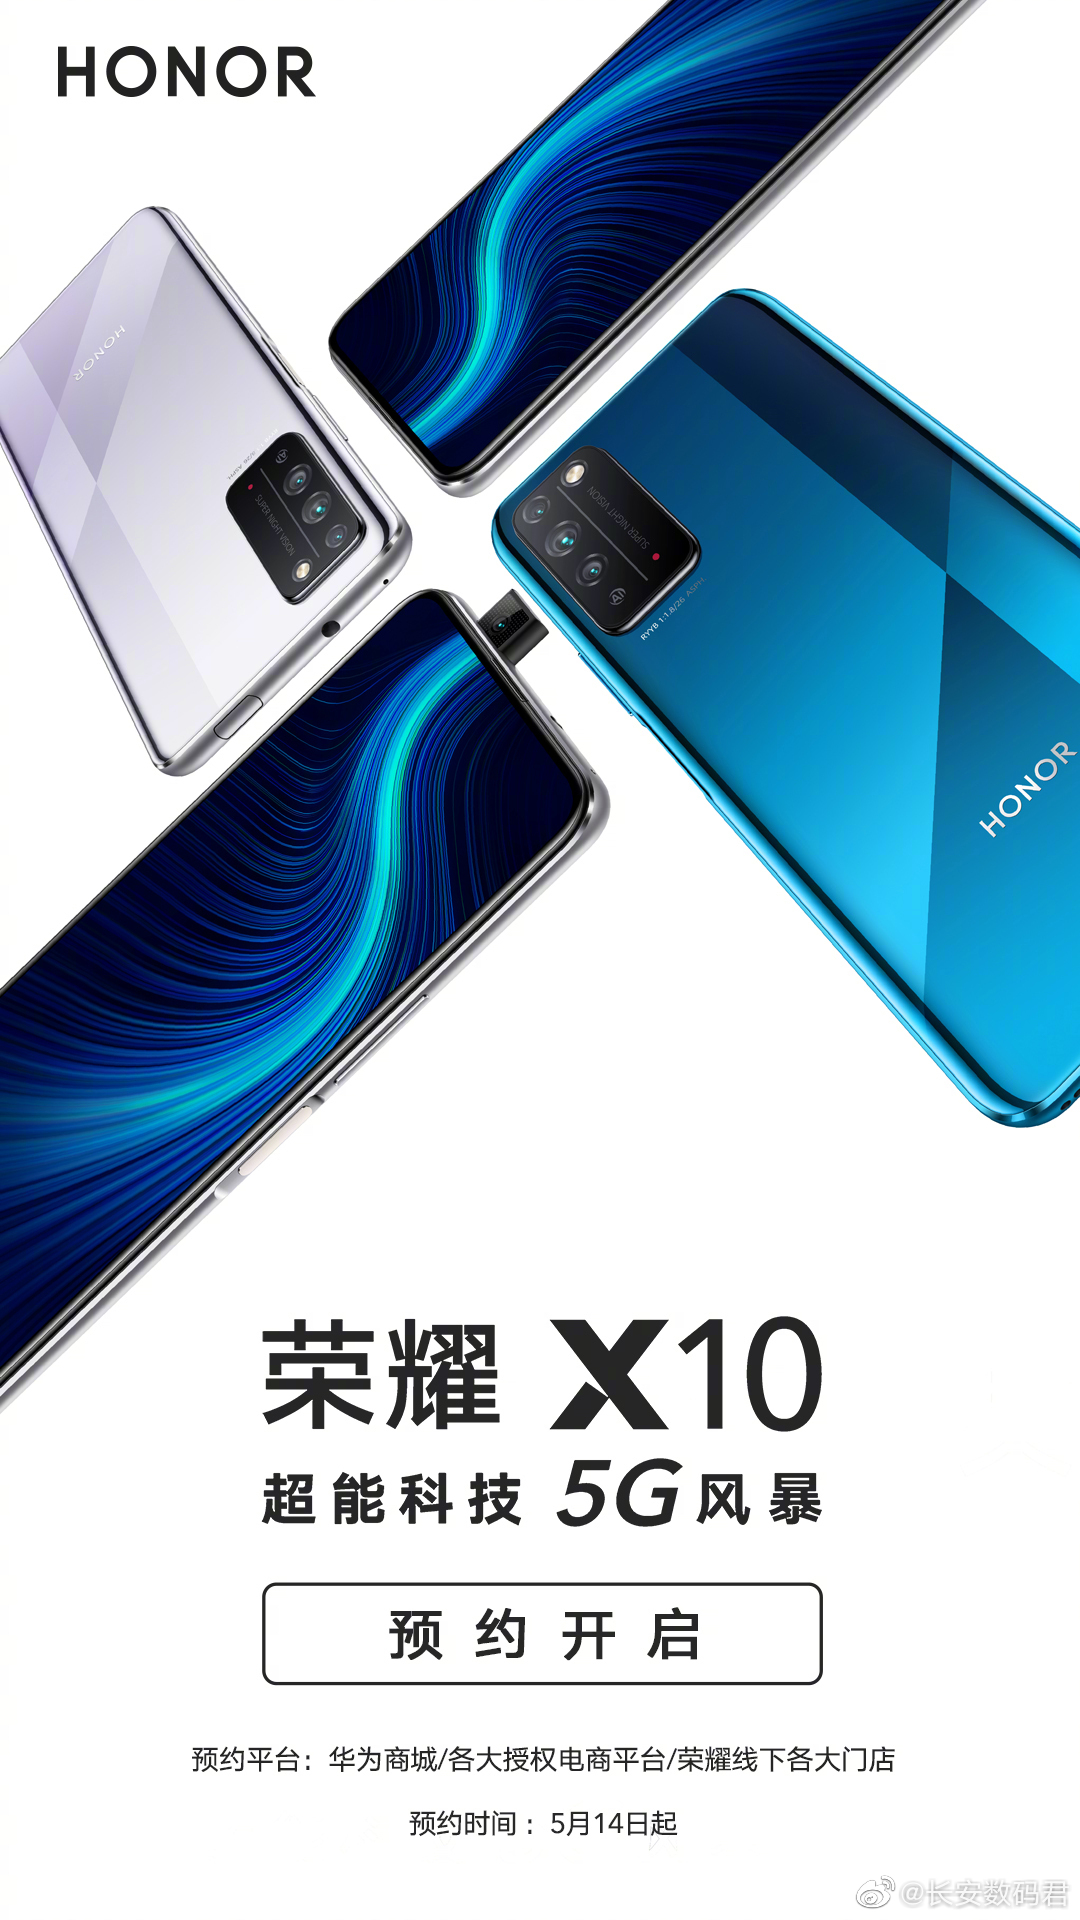 Honor X10 official press render